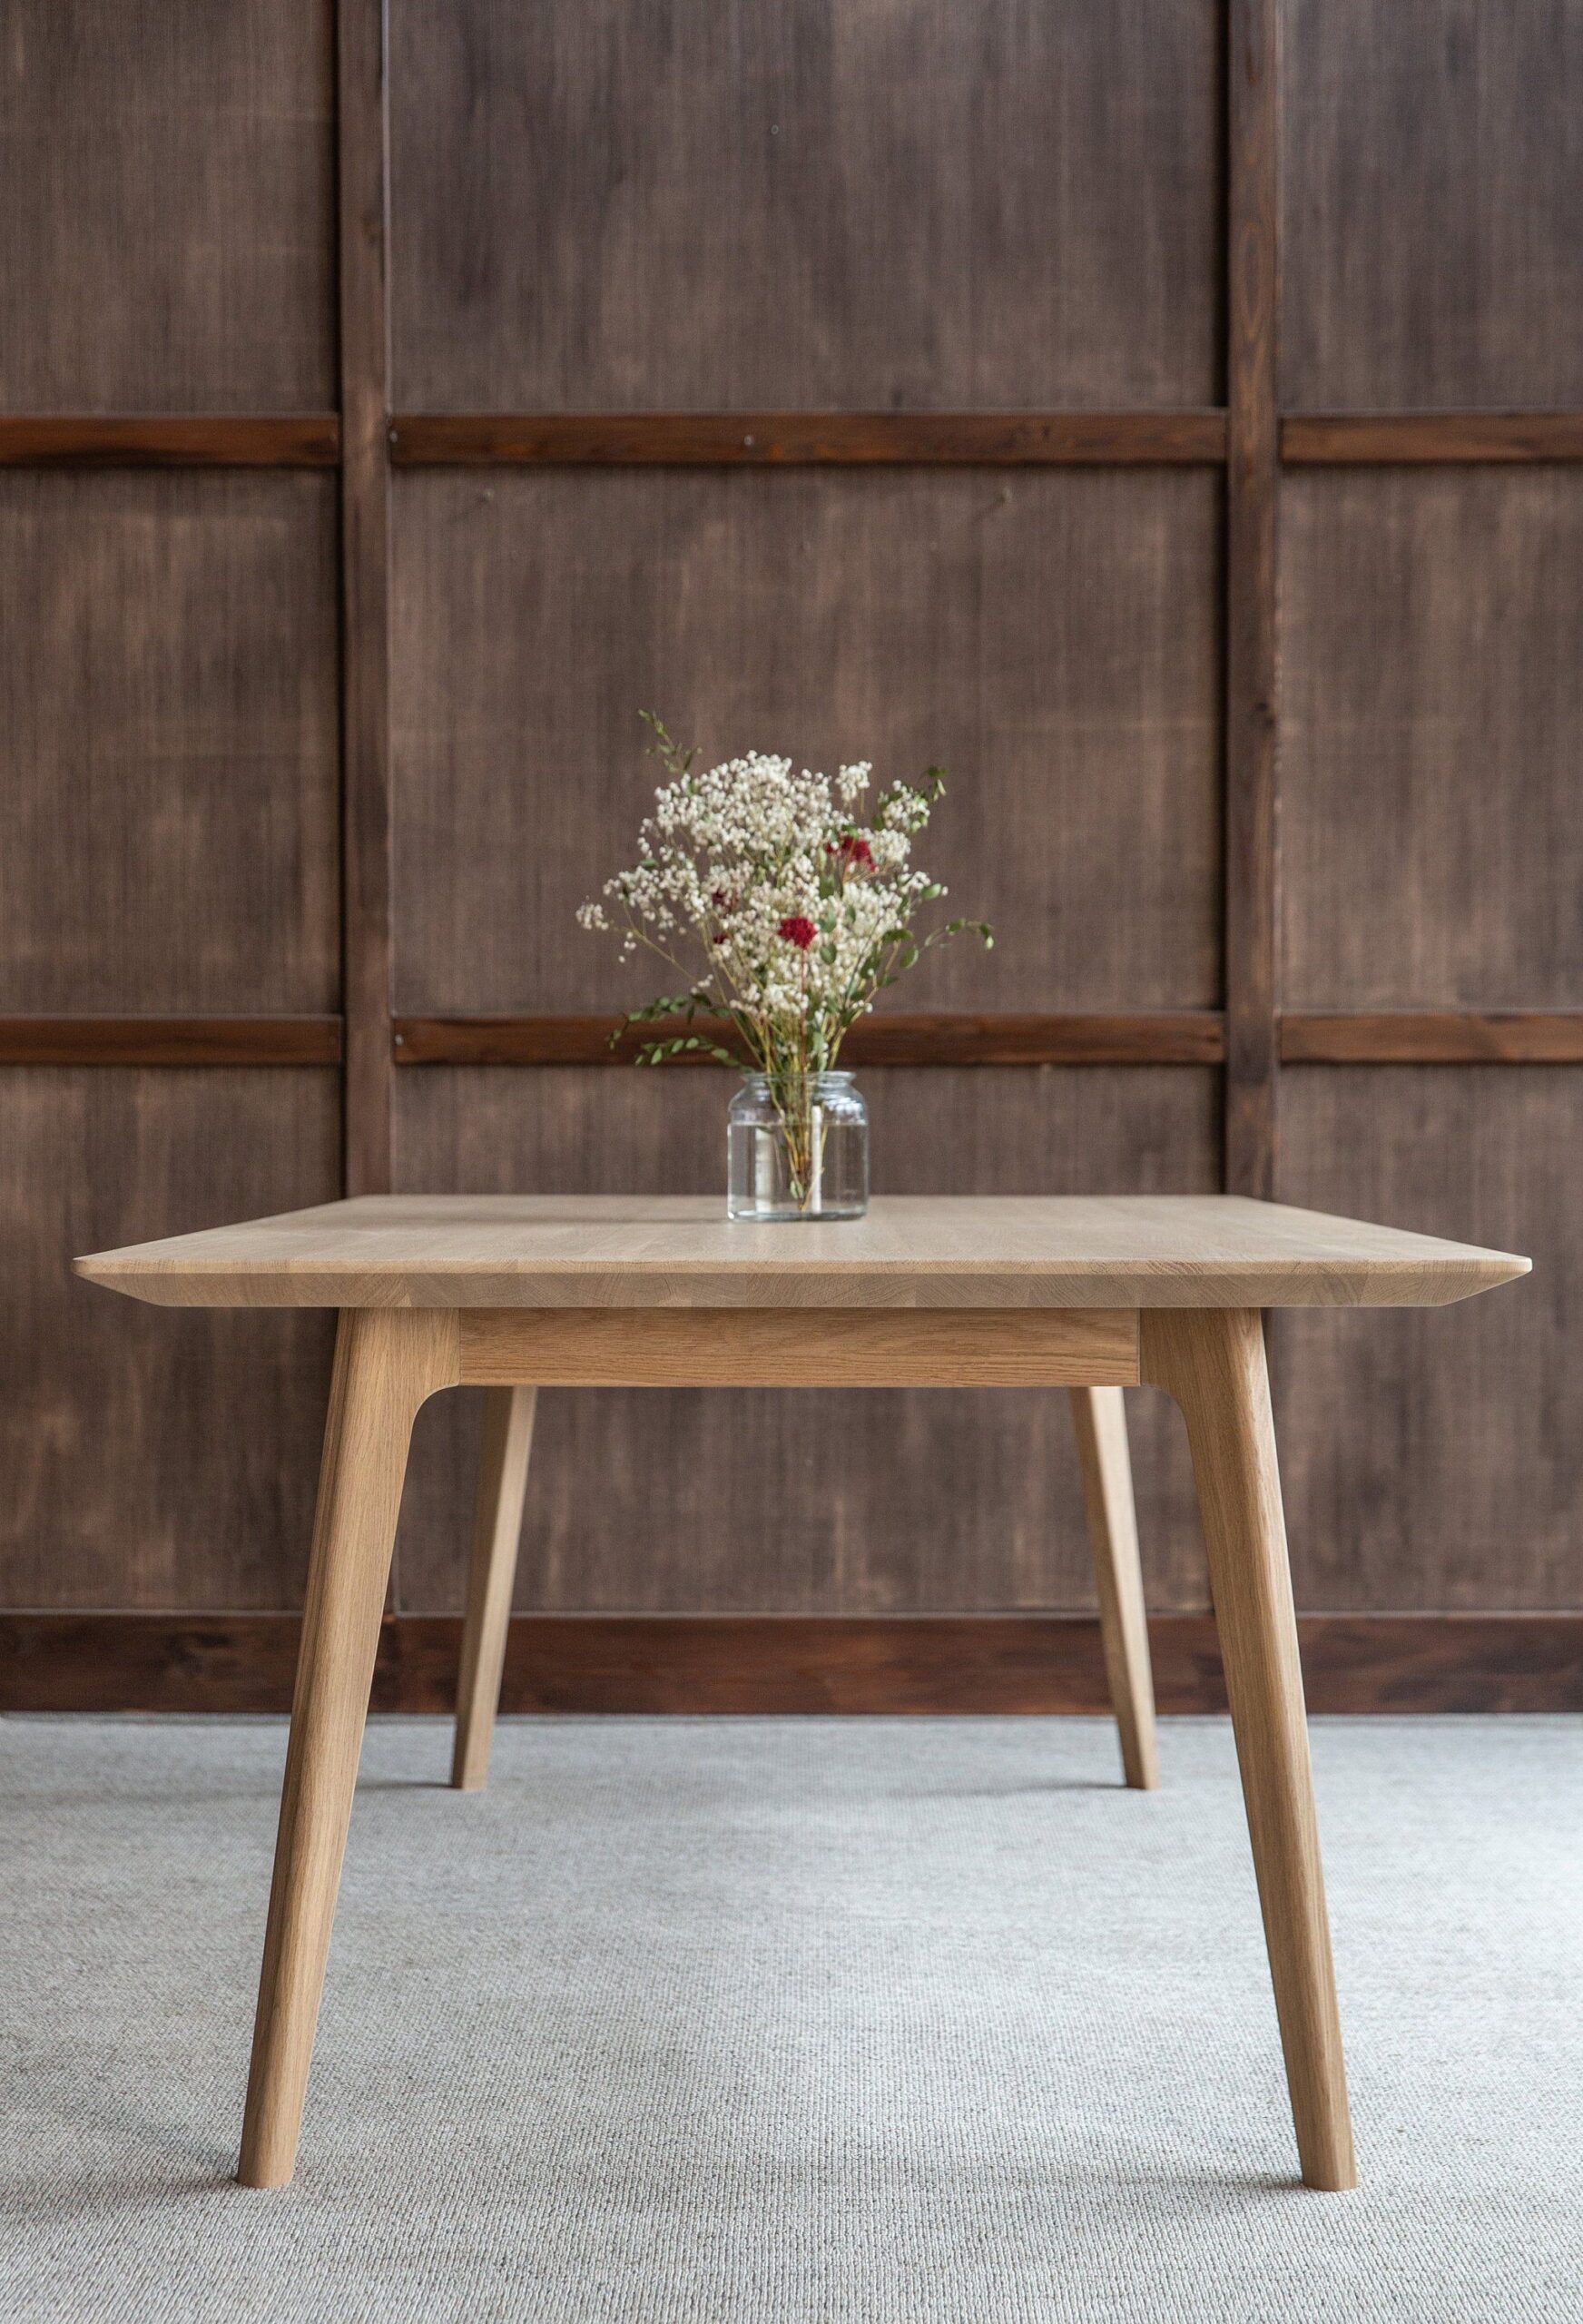 Innovative Designs for Stylish Wooden Dining Tables